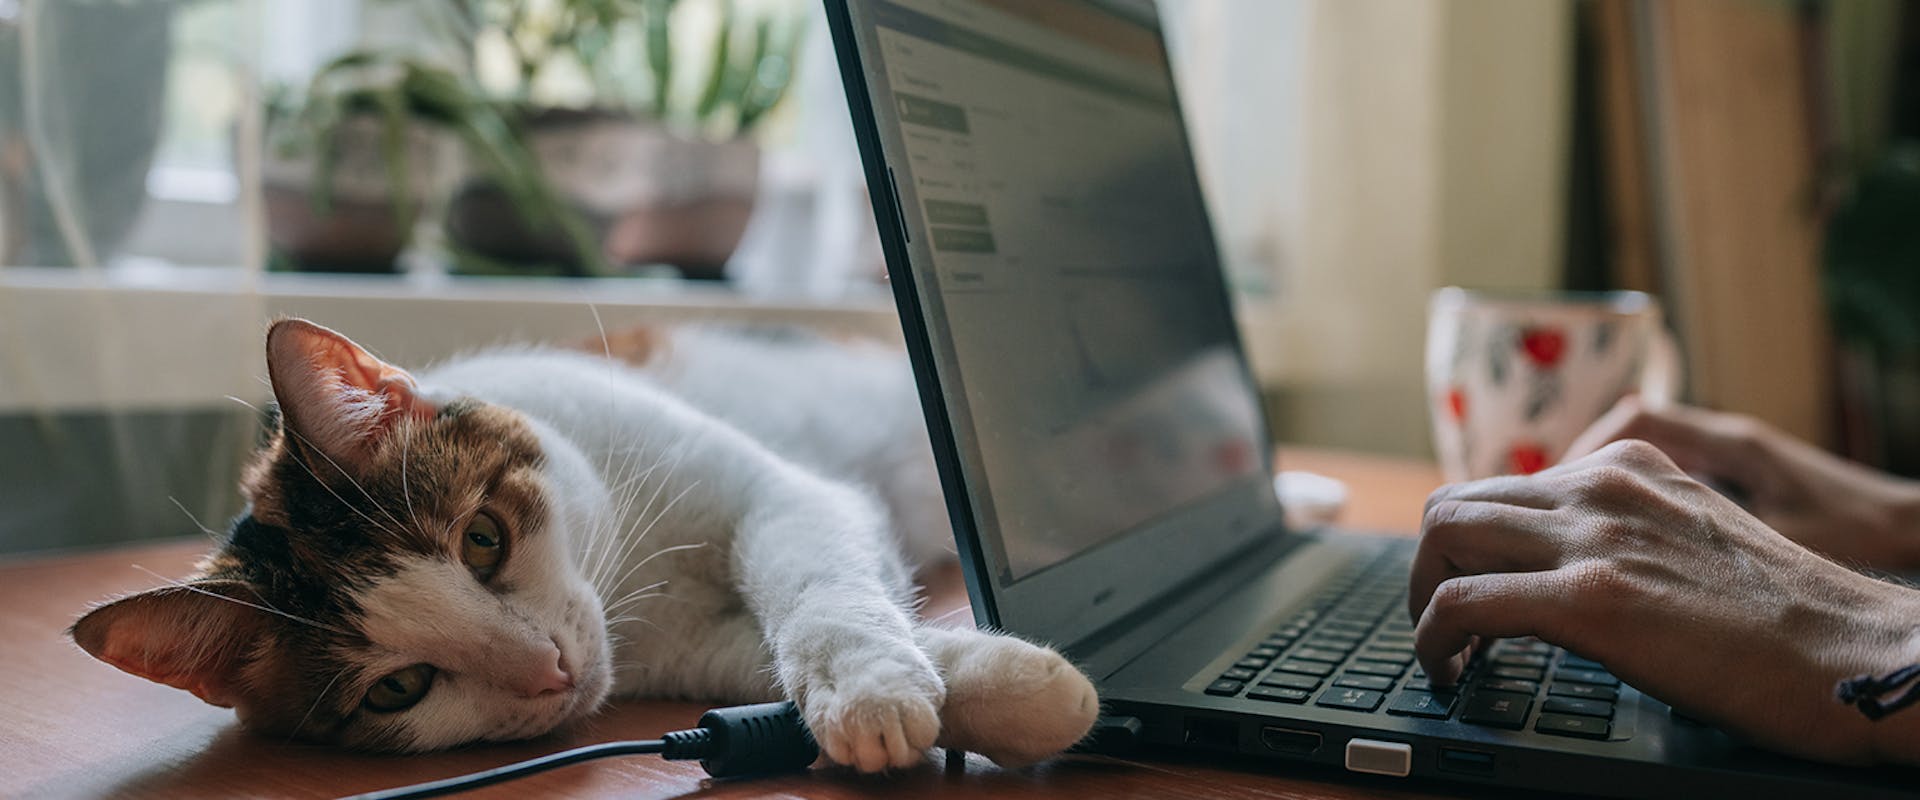 A cat resting on a desk while a person taps away at a laptop 